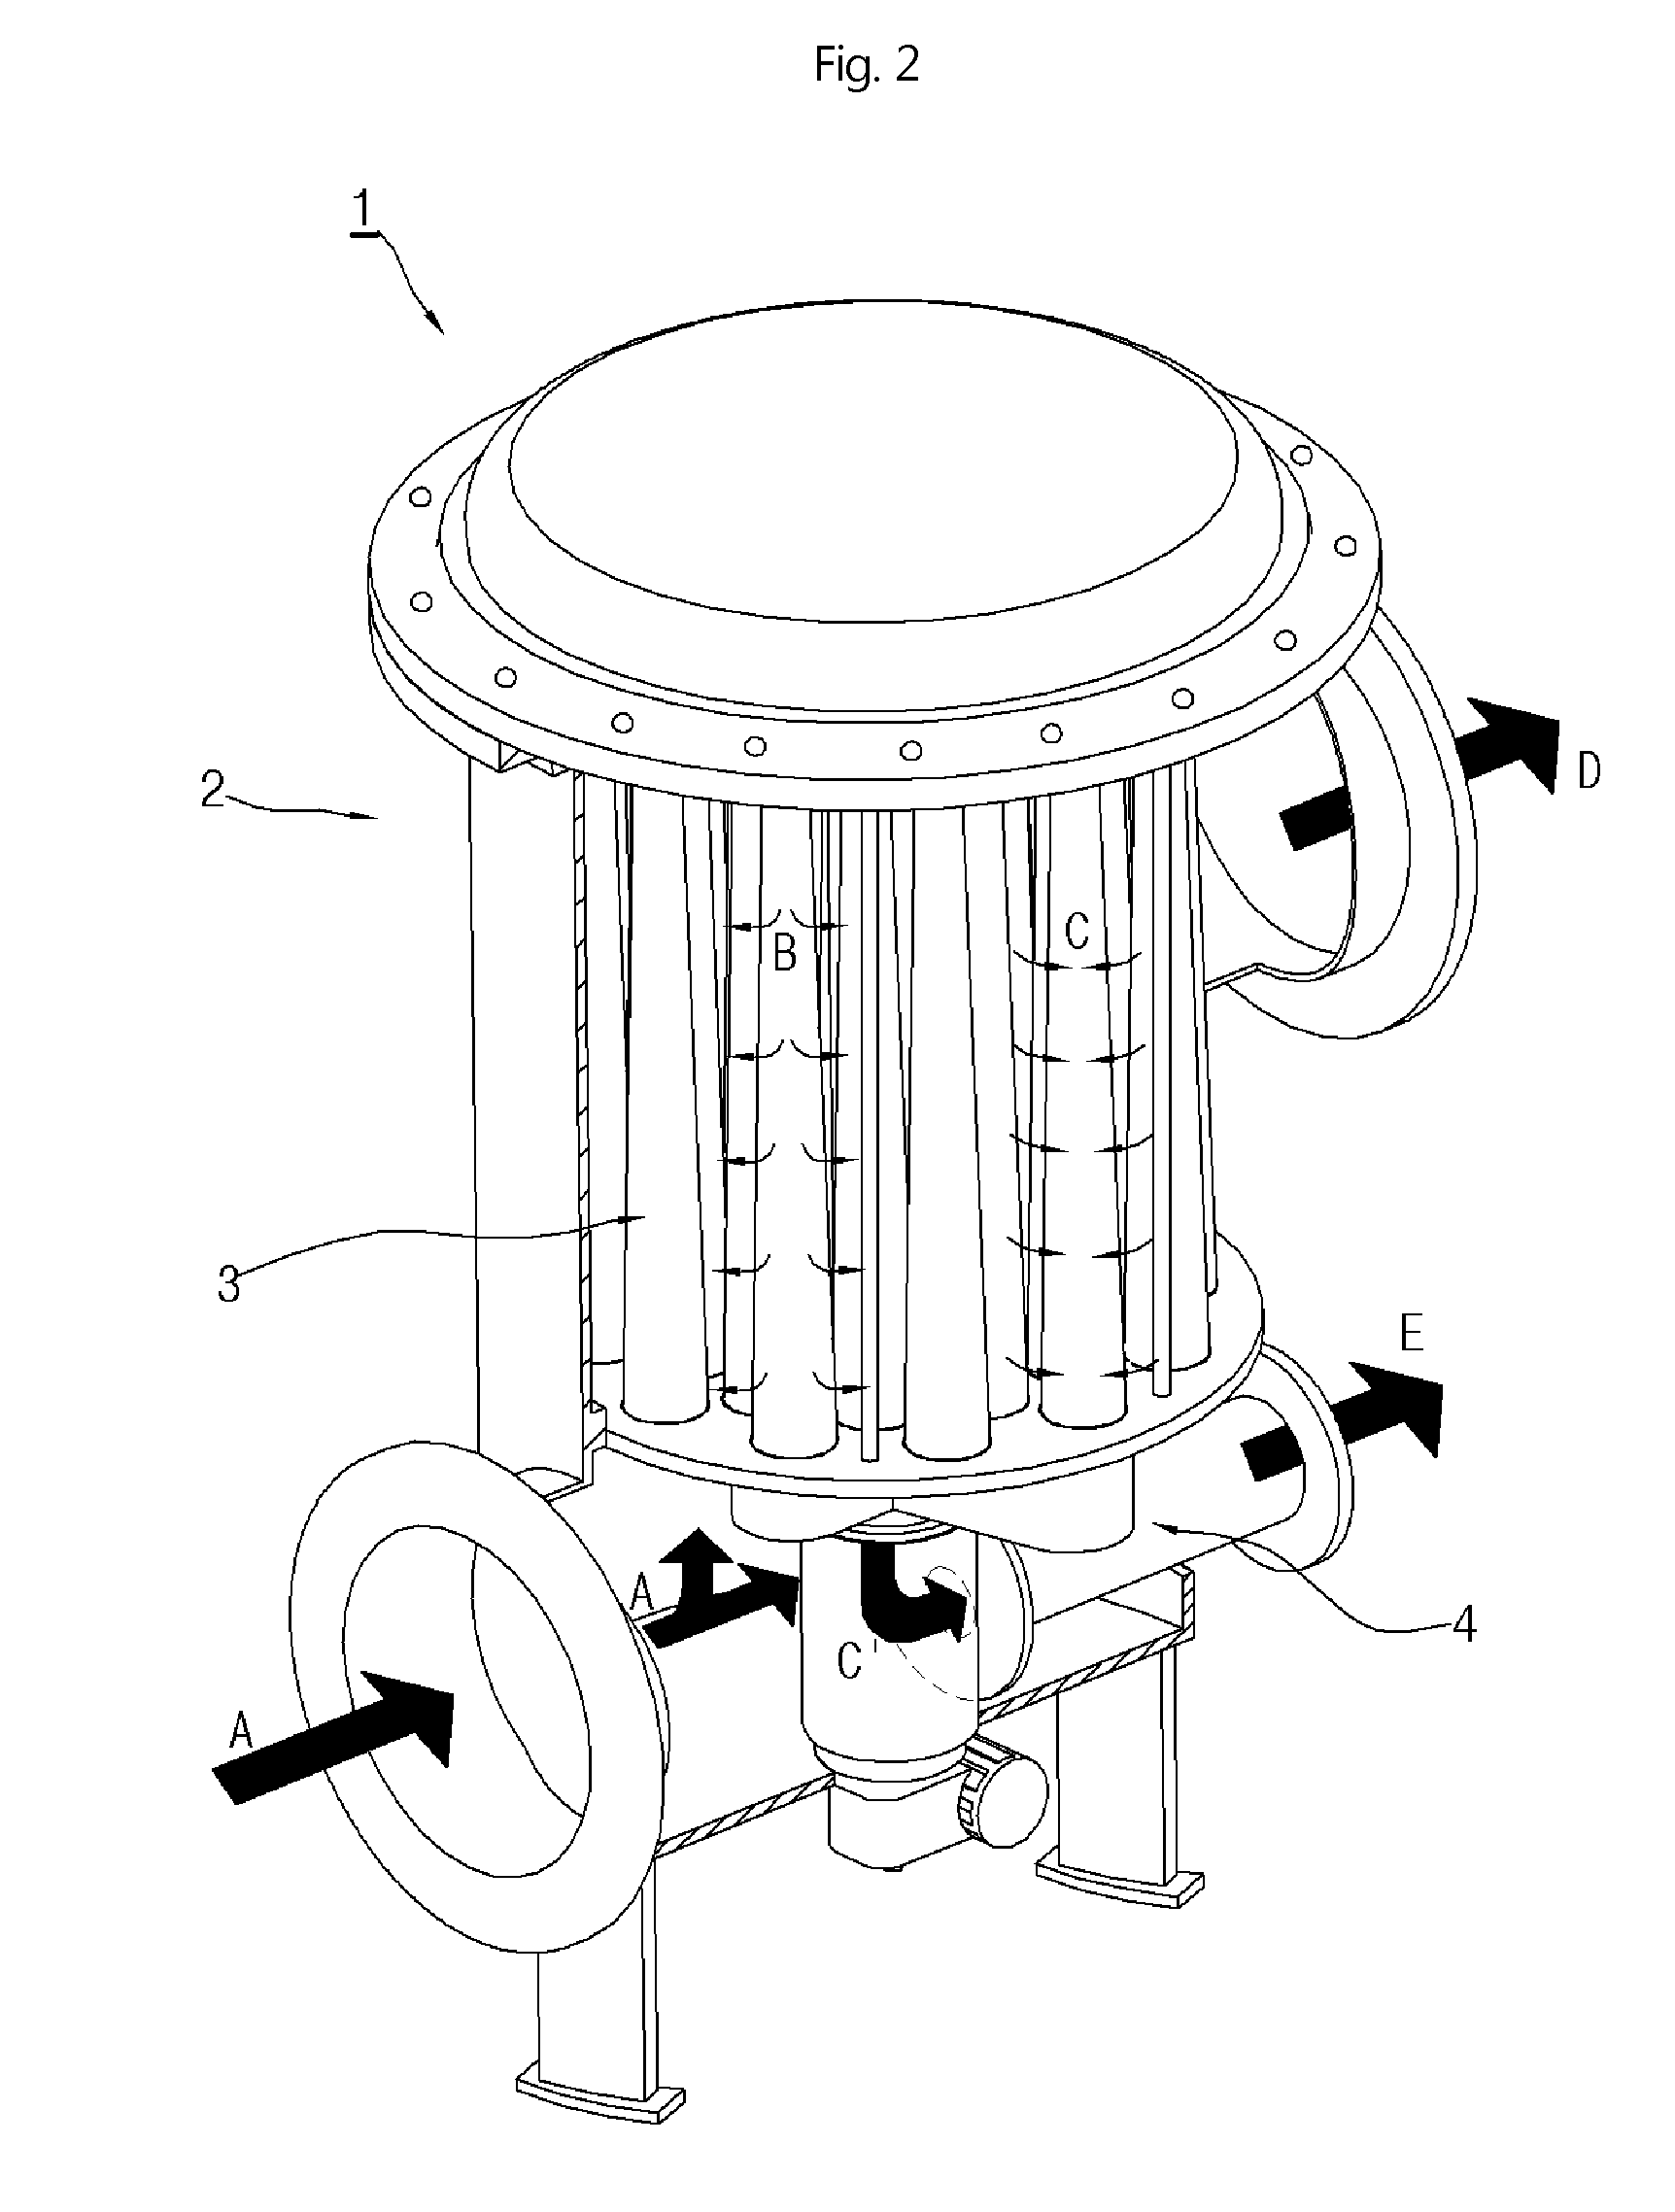 High-efficiency candle-type device for filtering ballast water having high-density filter structure